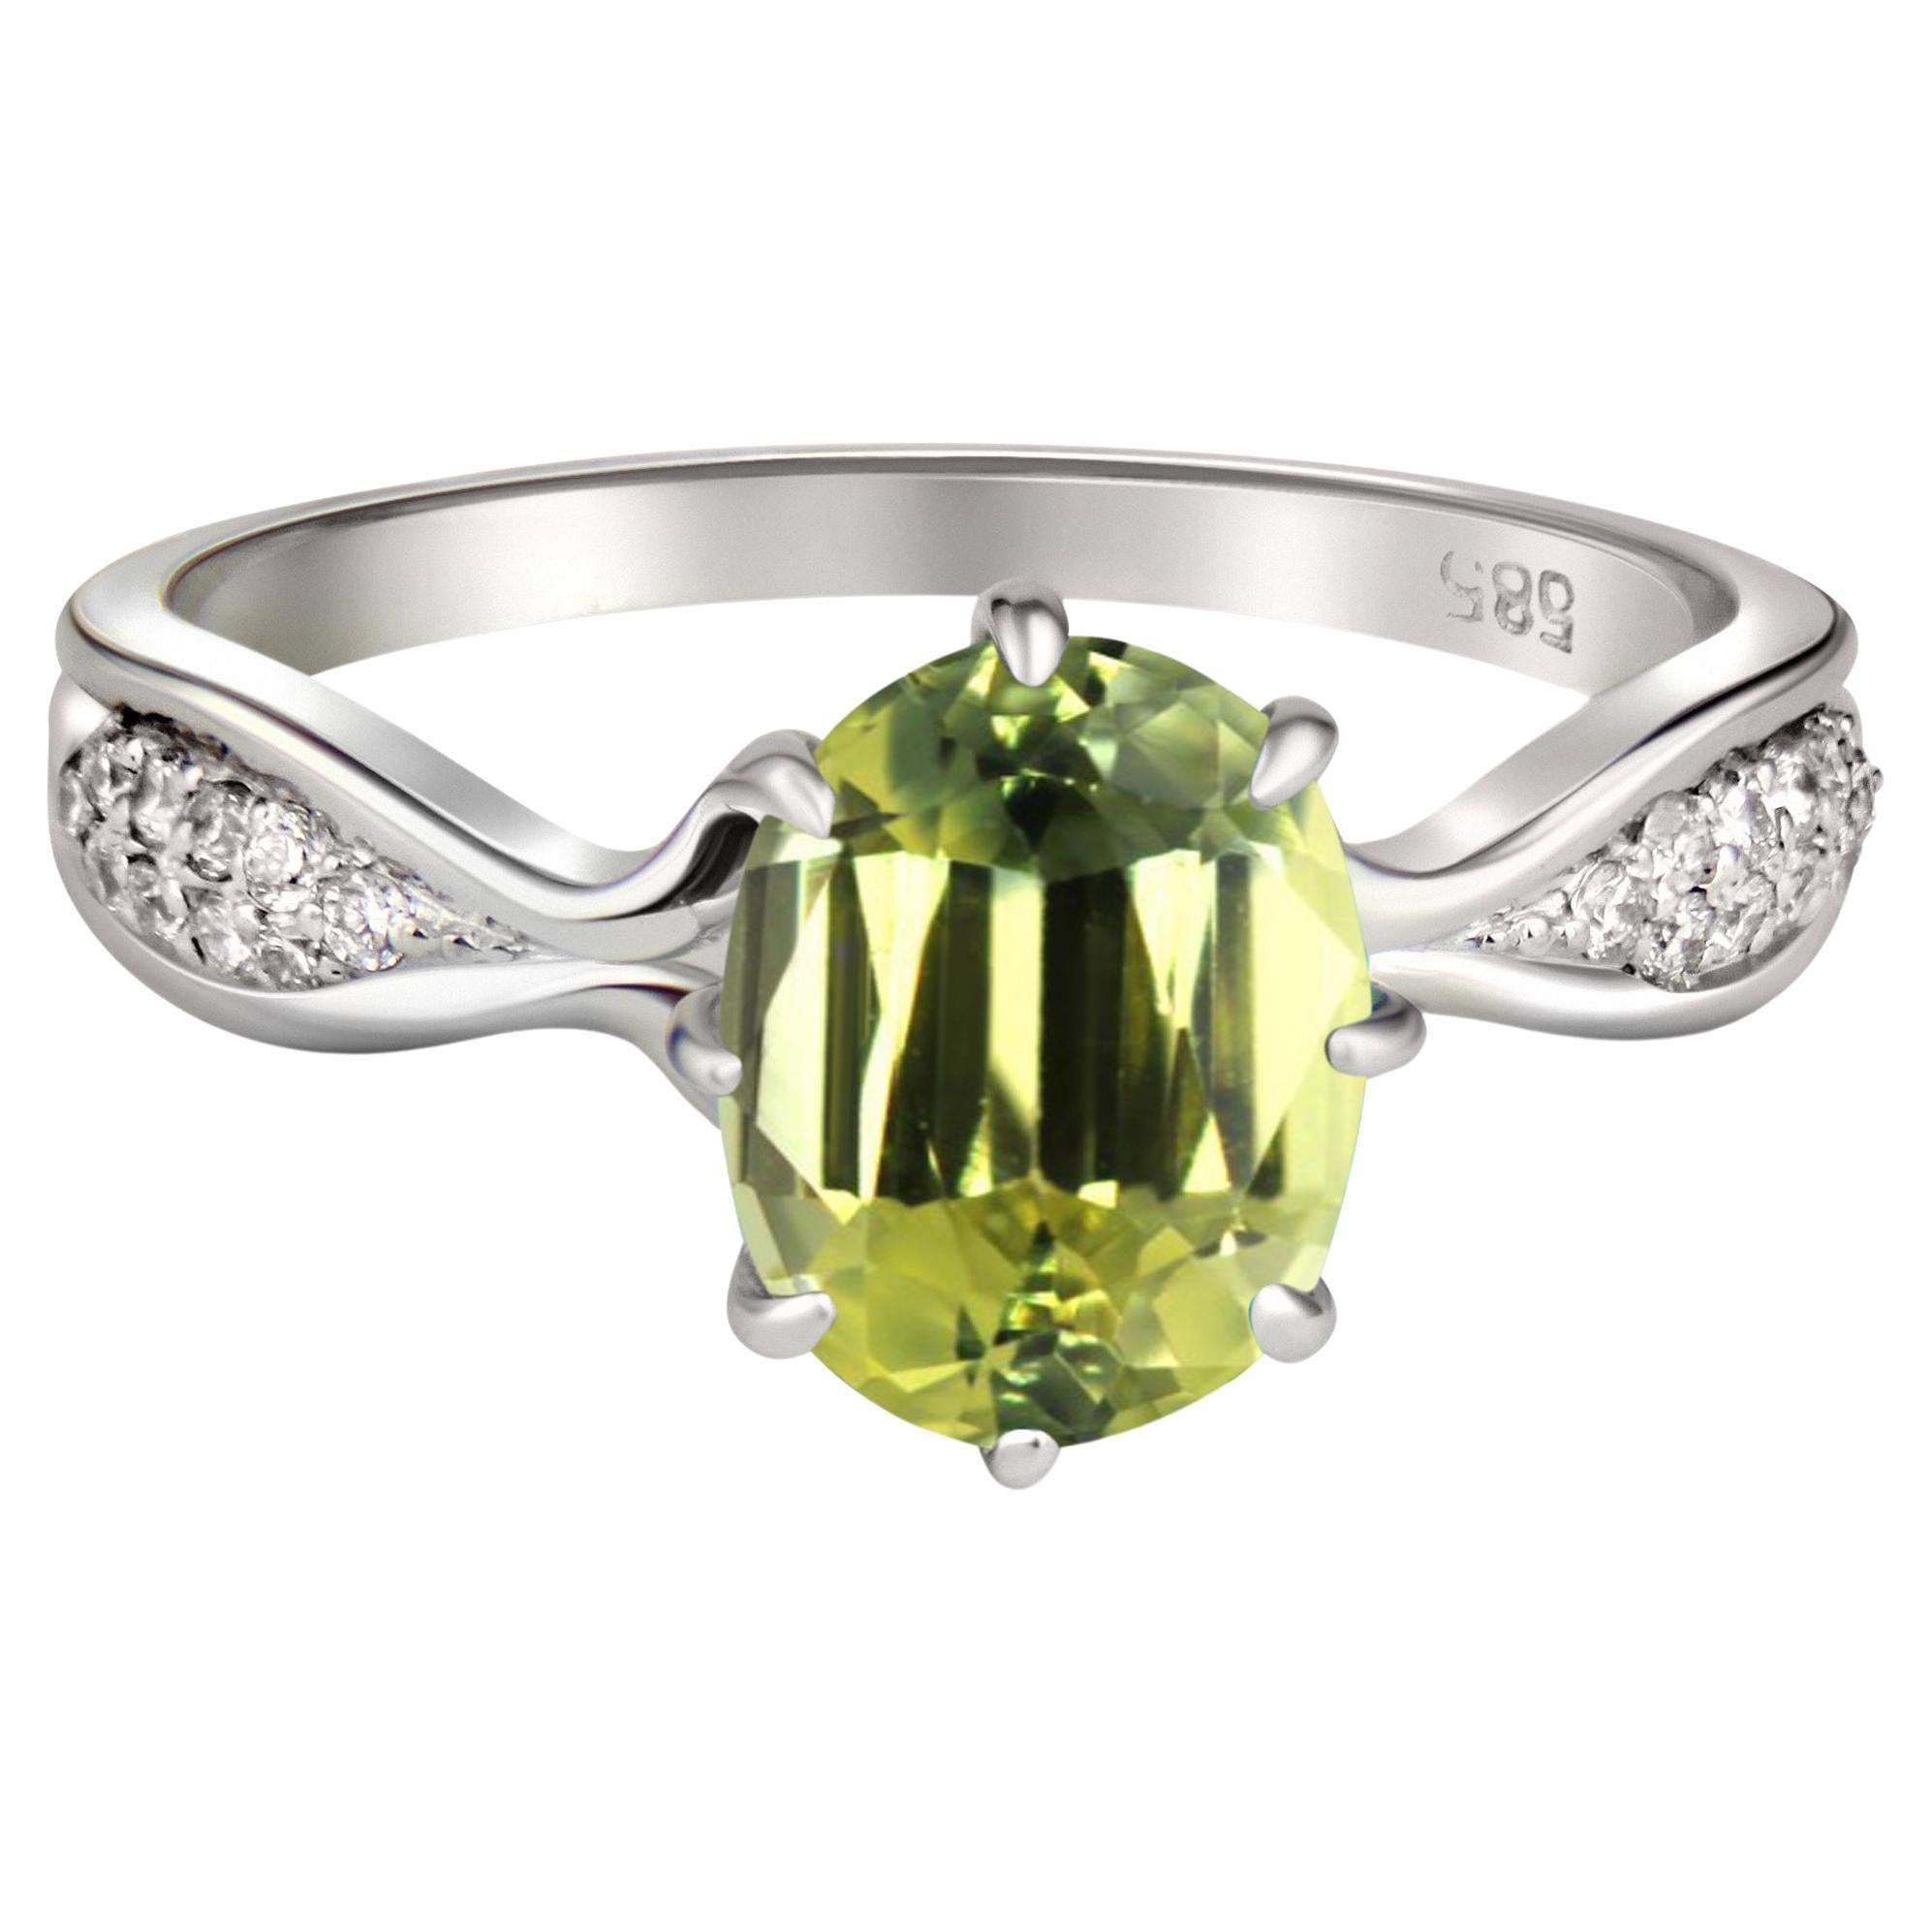 Oval peridot ring.  For Sale